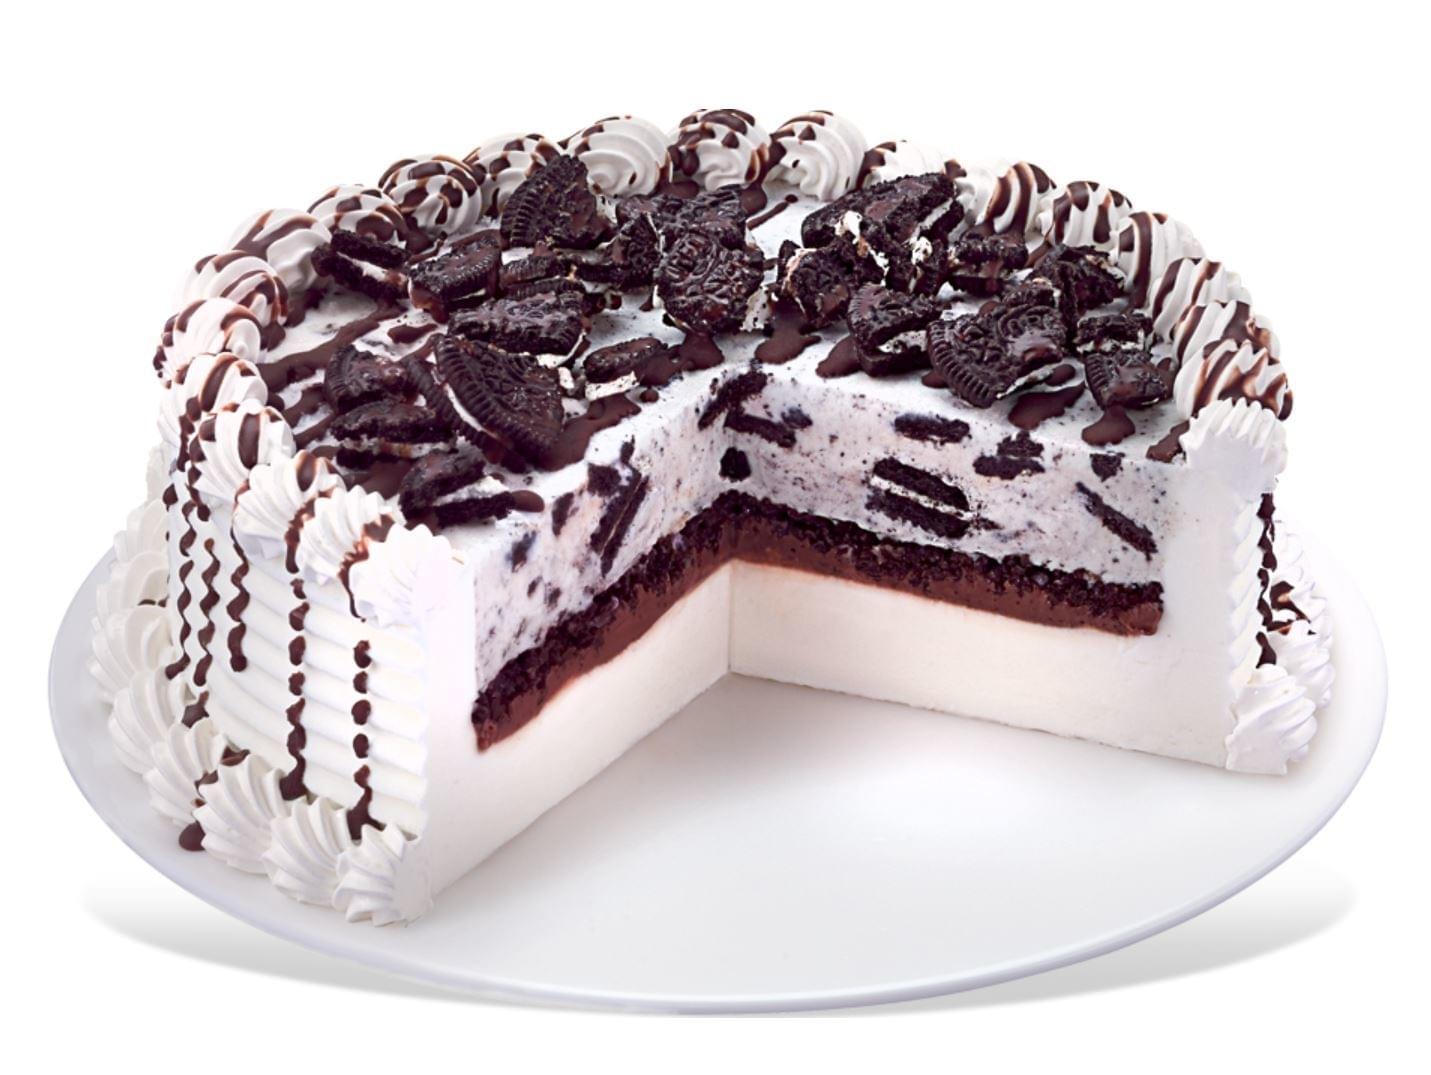 Dairy Queen Oreo Blizzard Cake Nutrition Facts